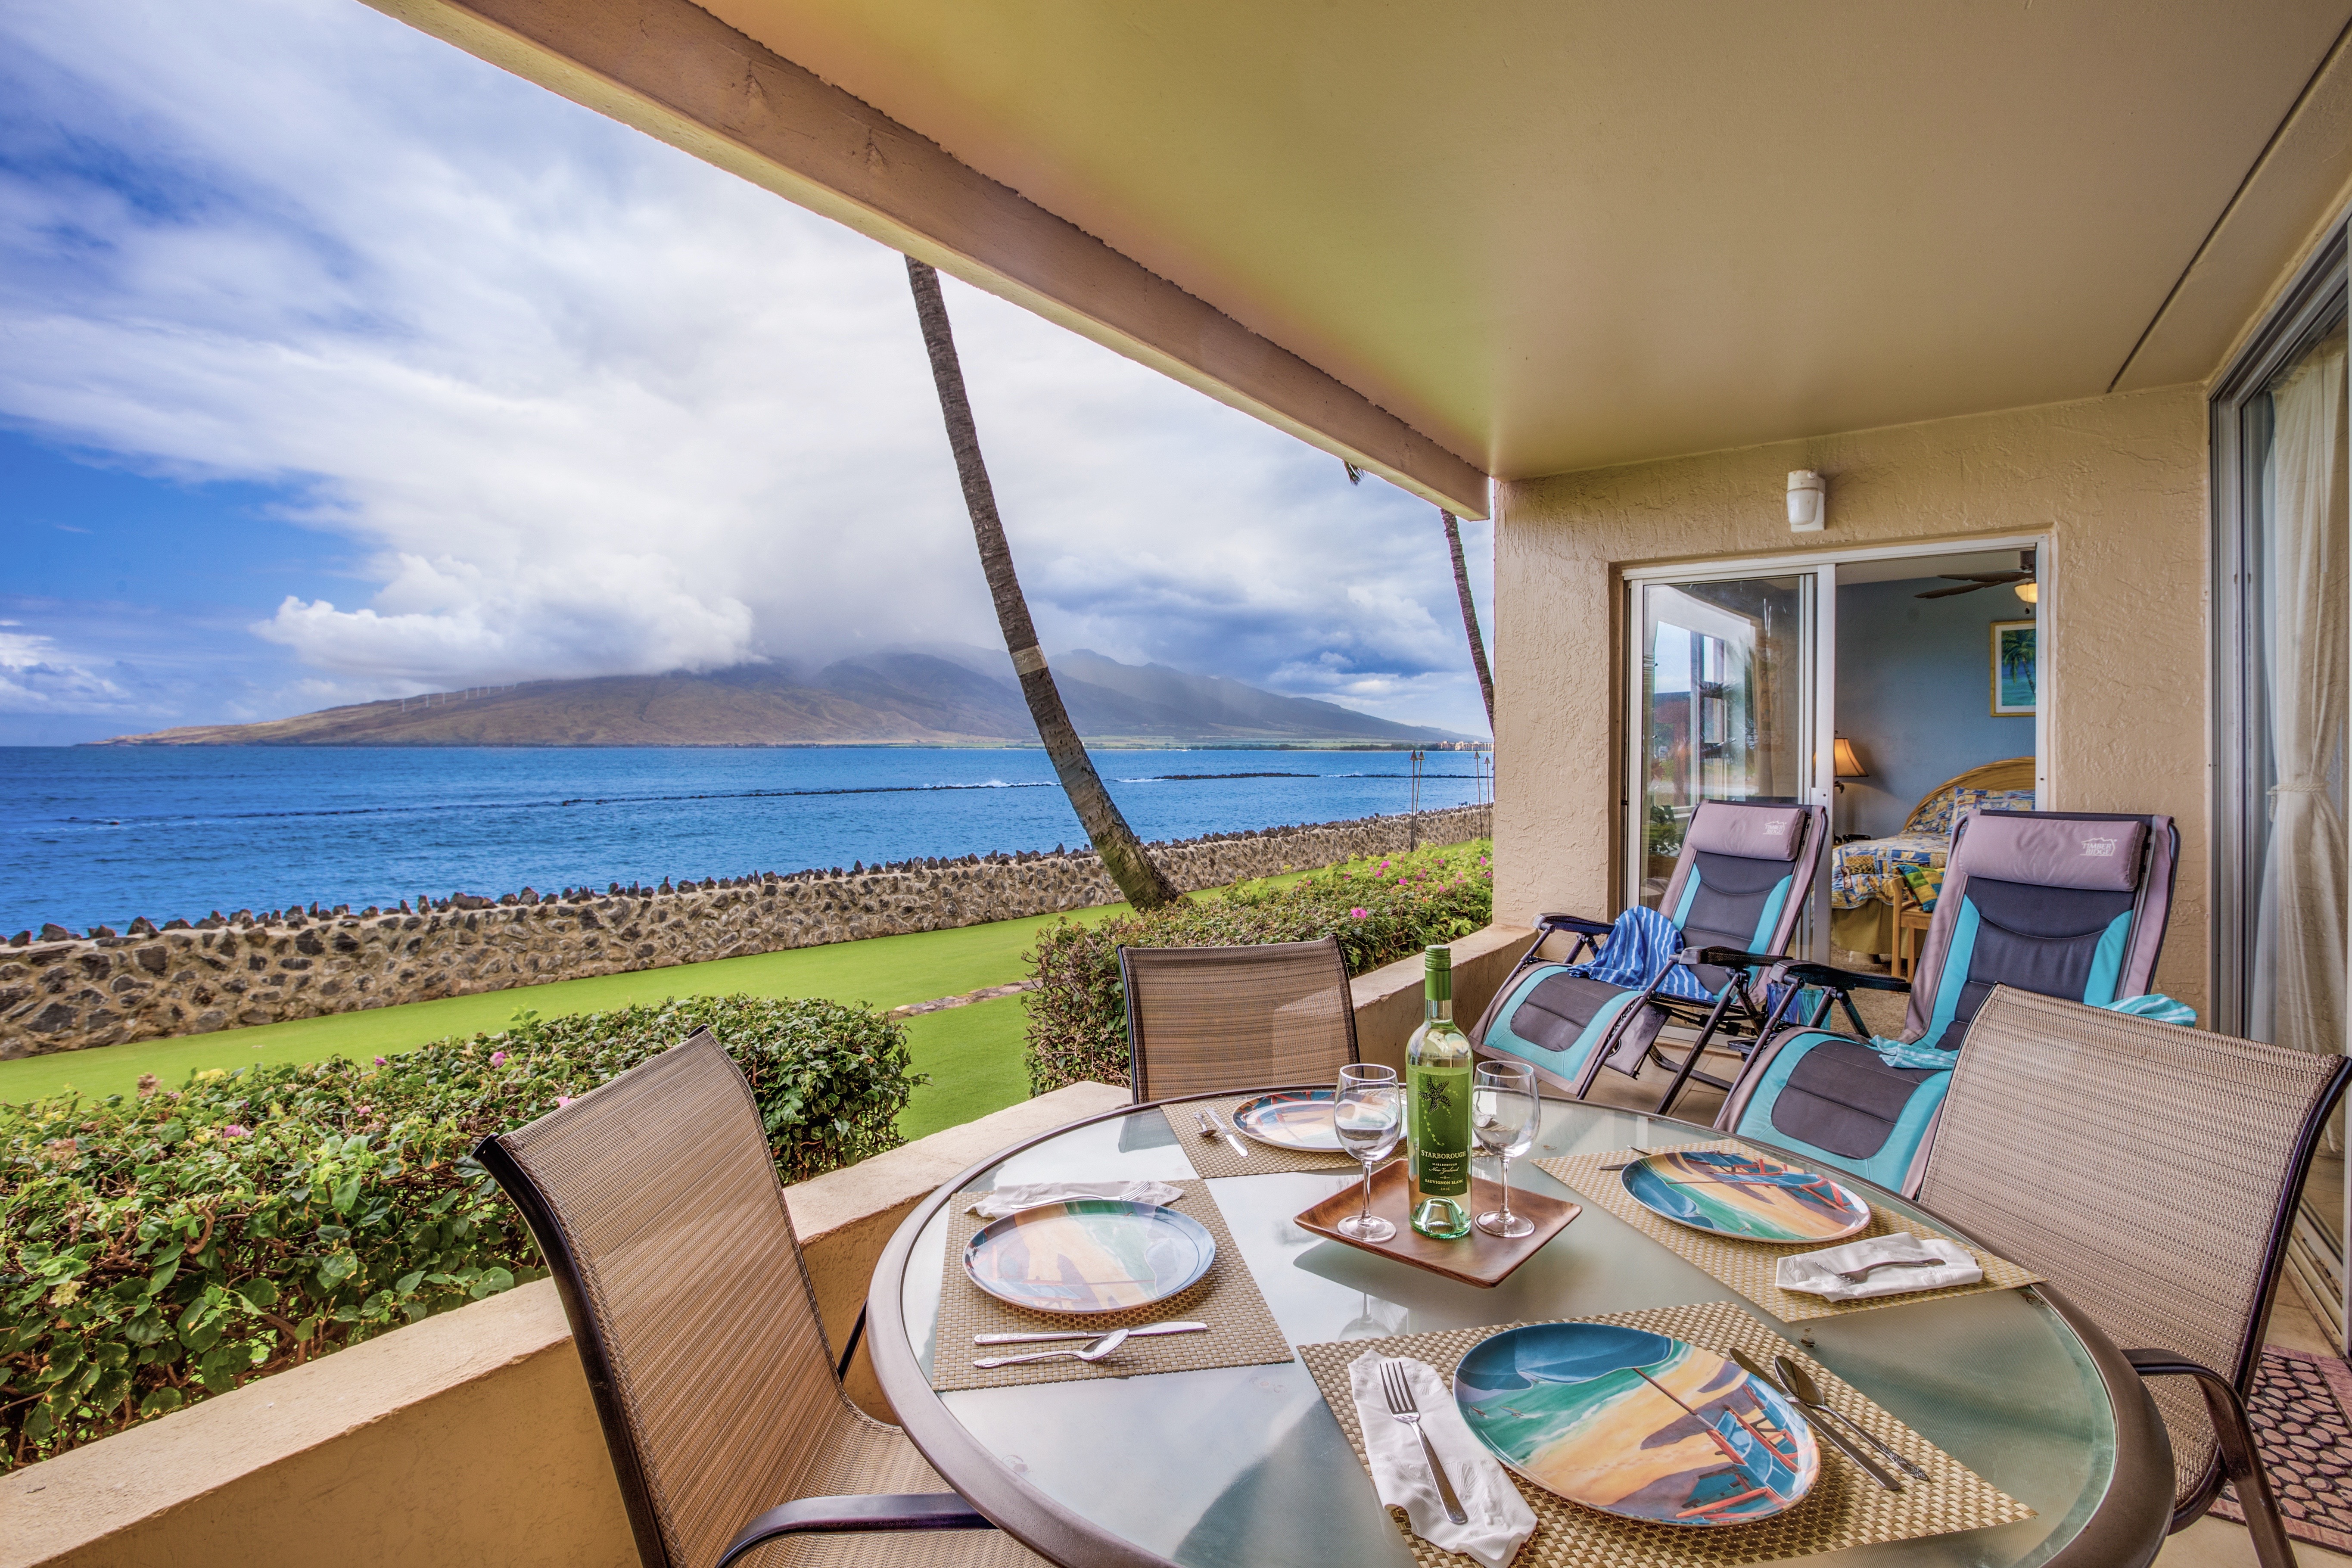 Maui Paradise Oceanfront Condo Air Conditioned 3 Bedroom 2 